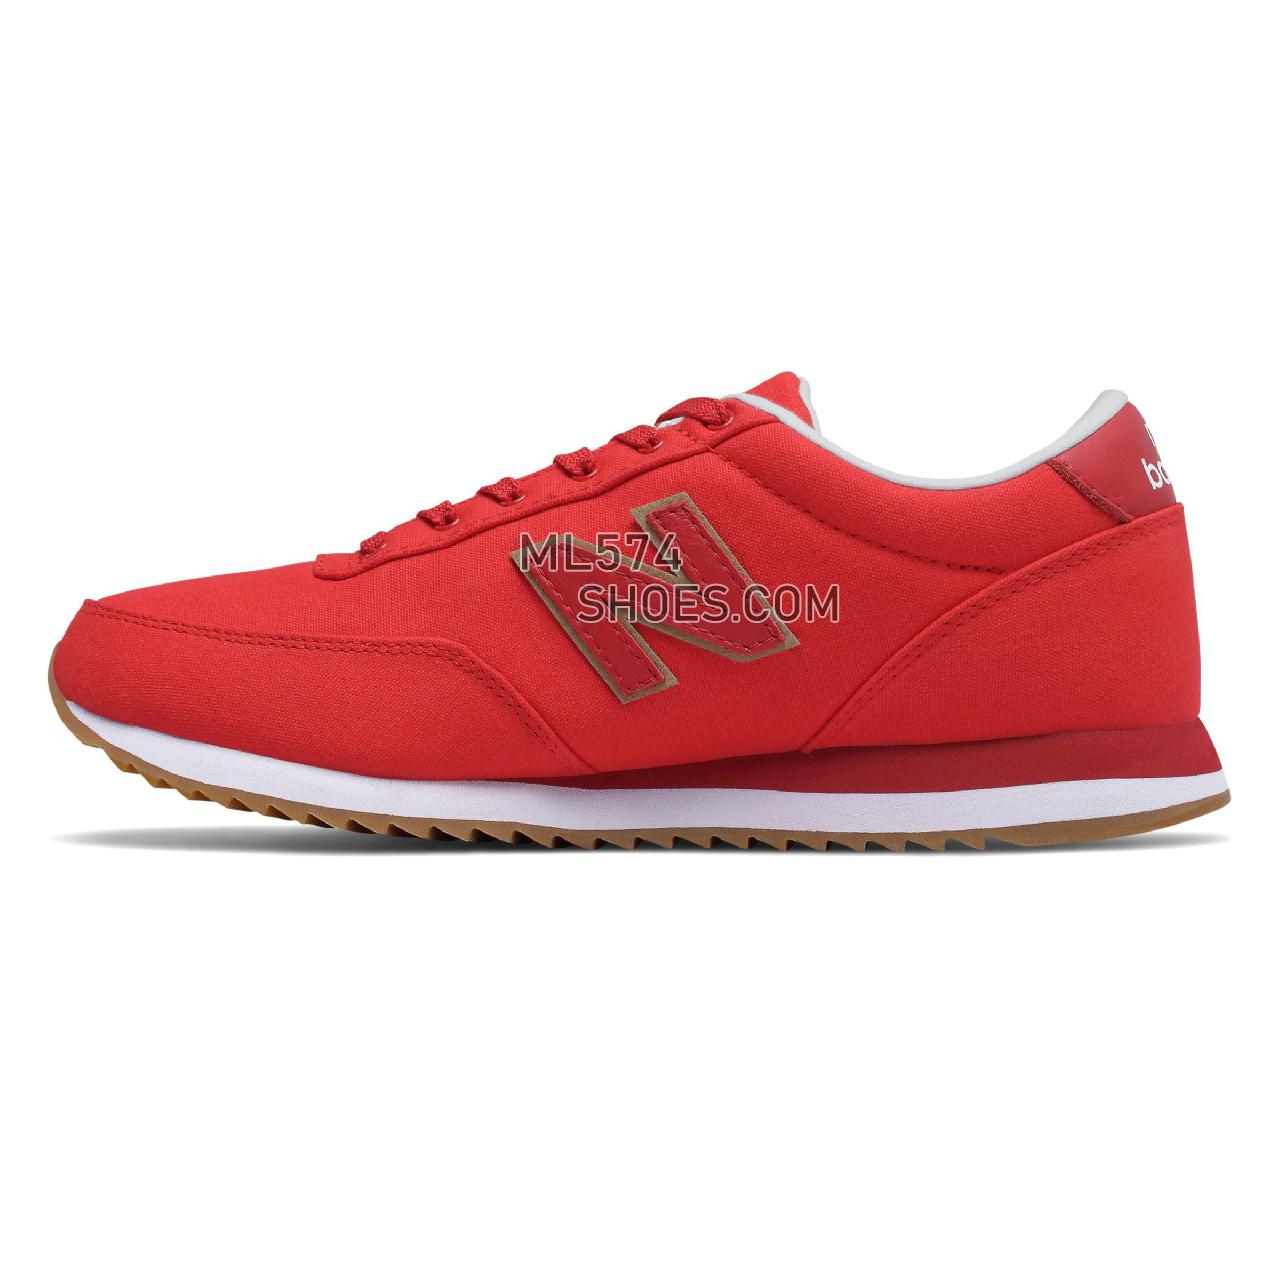 New Balance 501 - Men's Classic Sneakers - Red with White - MZ501JAB